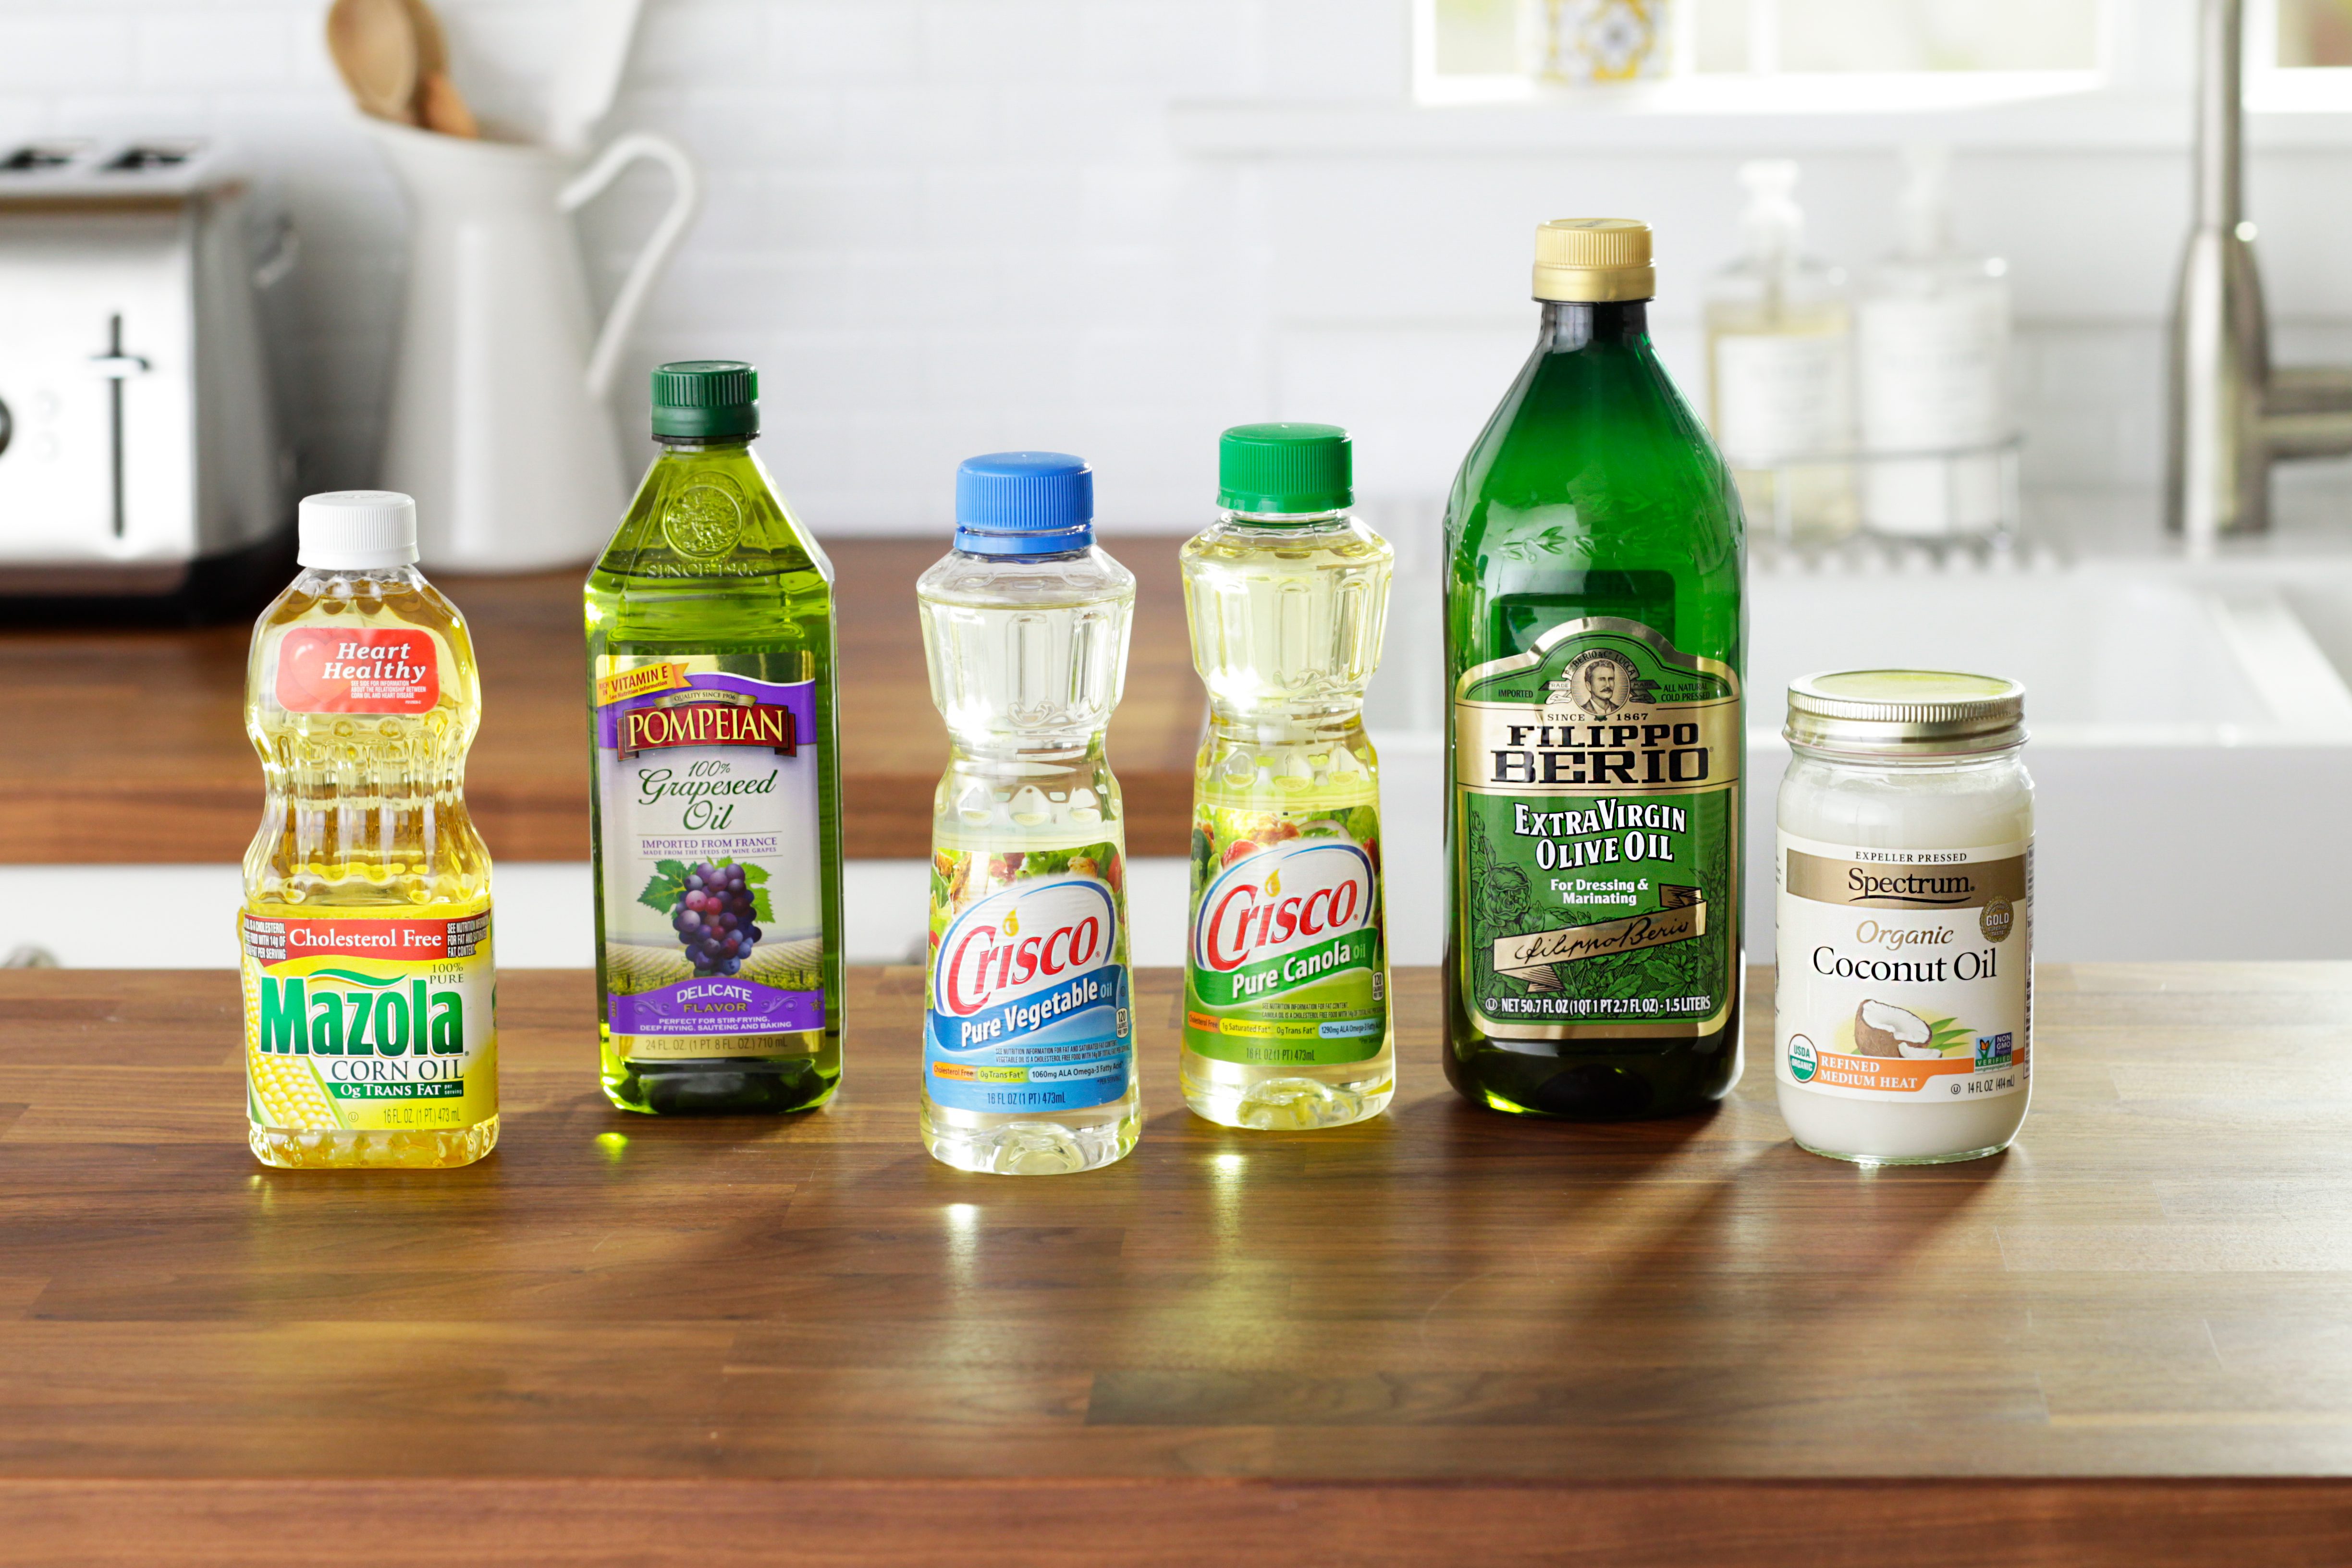 generic cooking oil bottles in kitchen environment